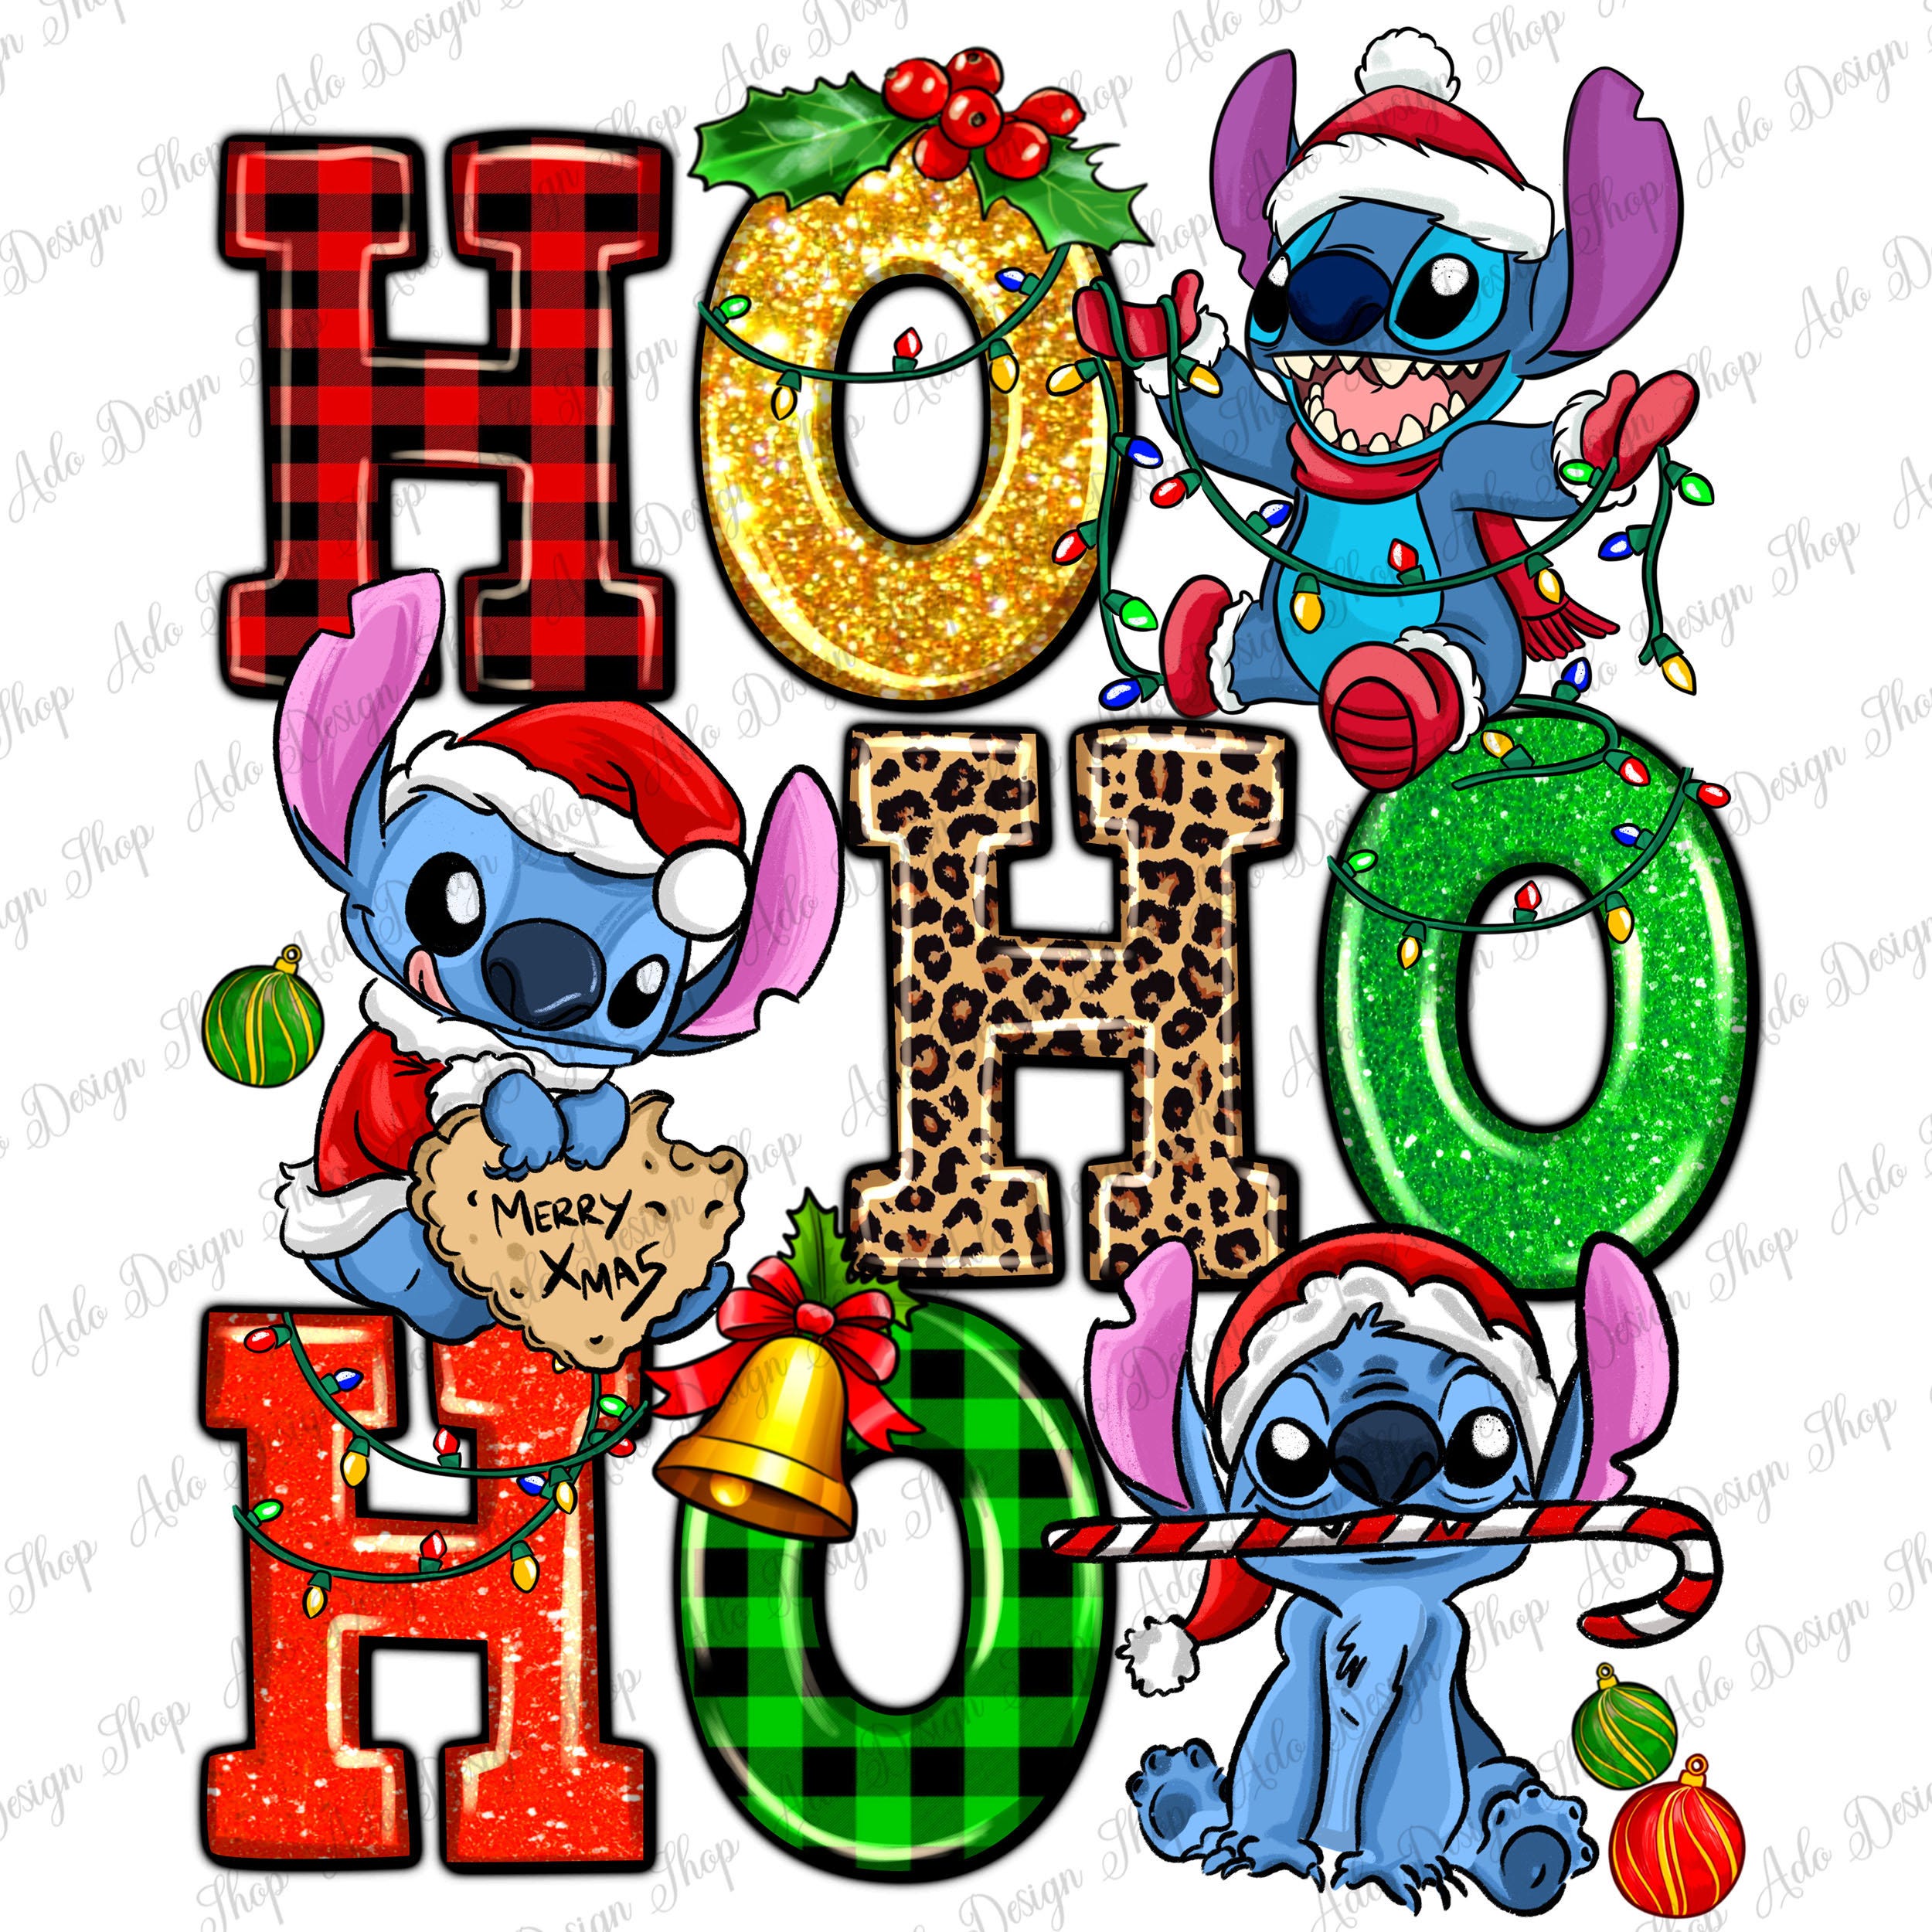 Ho ho ho Stitch png sublimation design download, Christmas Stitch png, Happy New Year png, Merry Christmas png, sublimate designs download